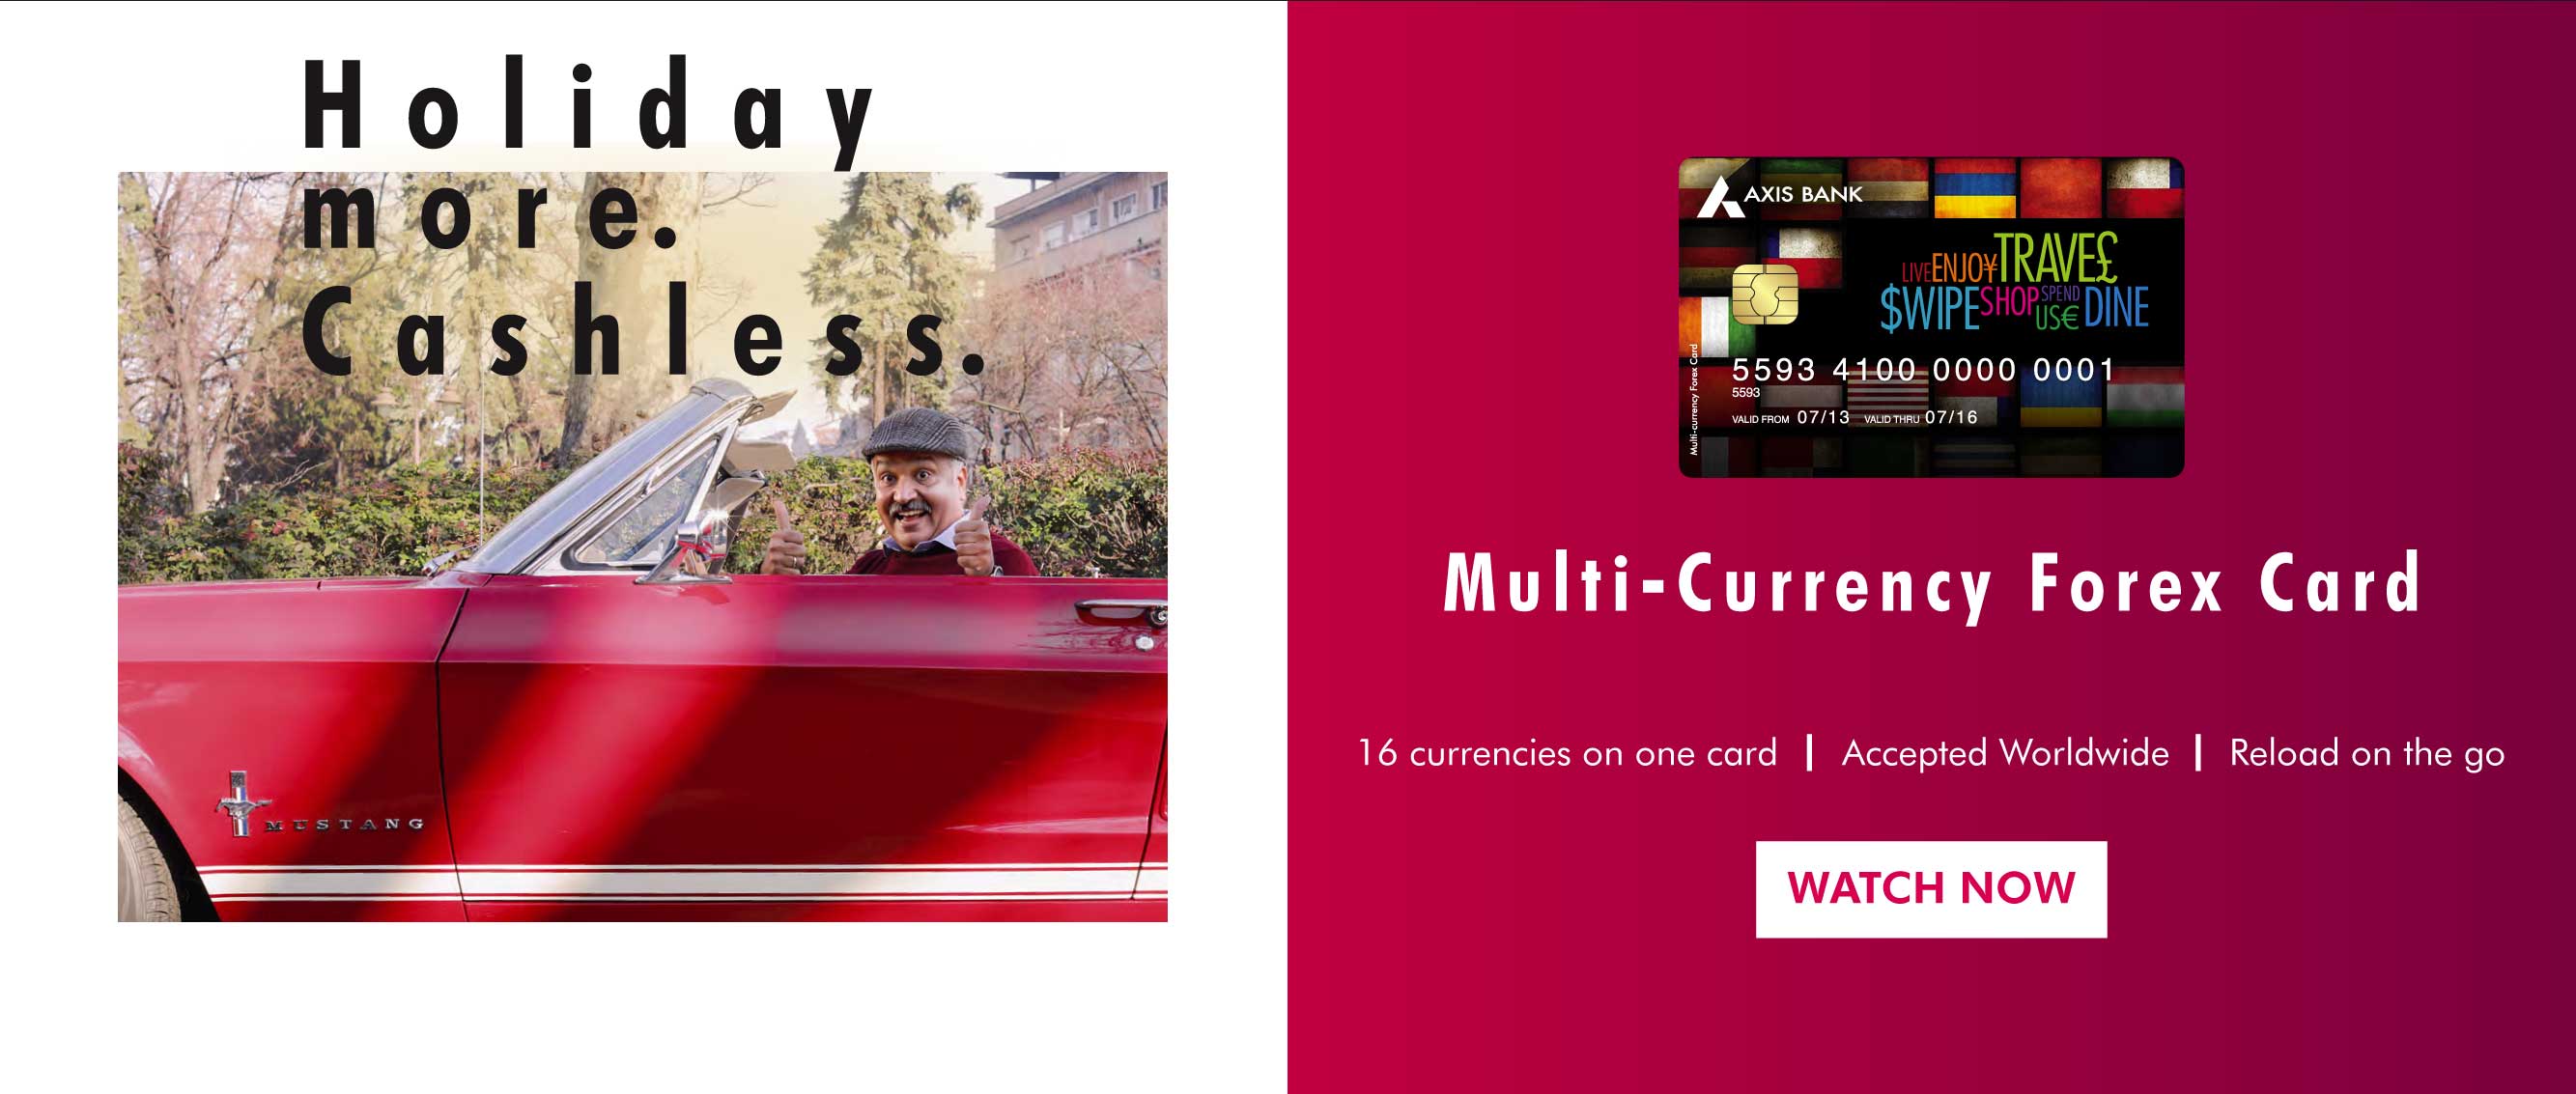 Multi currency forex card axis bank customer care